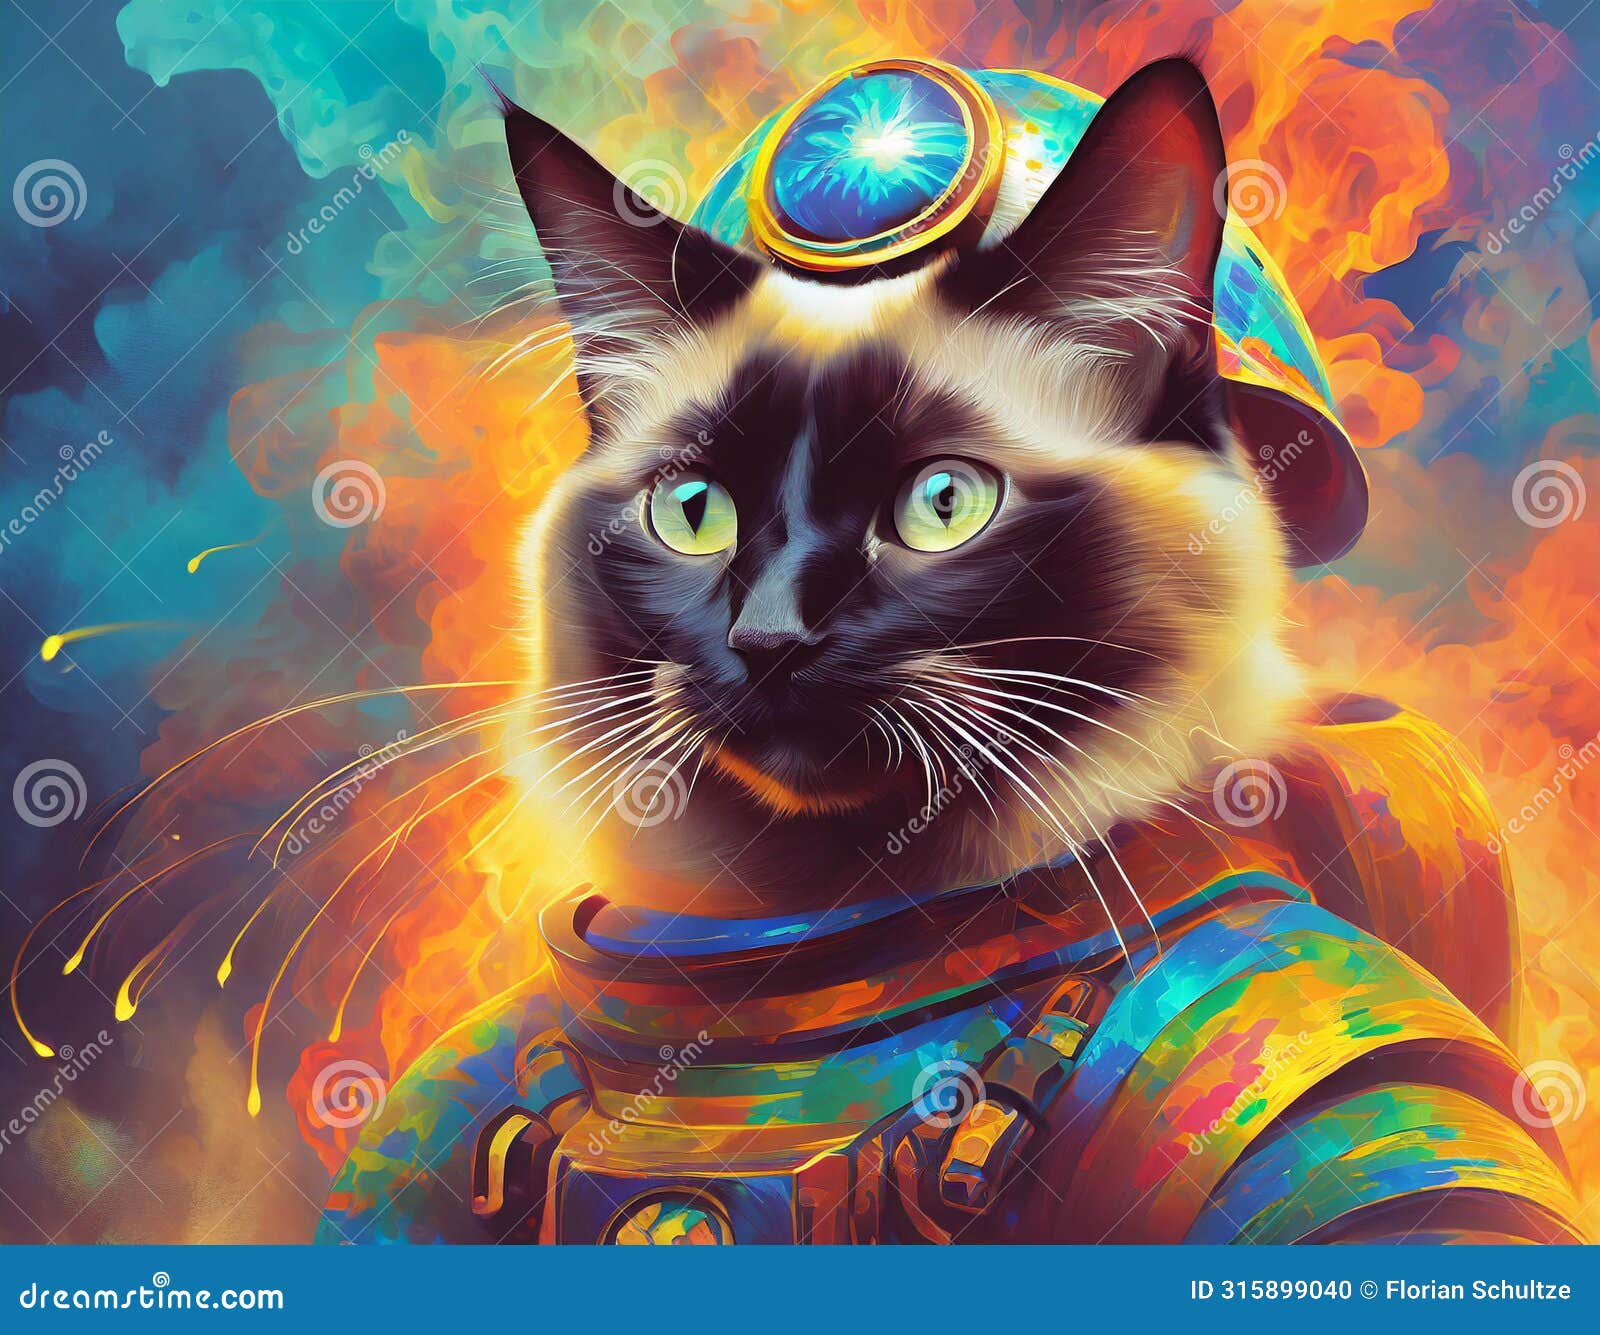 anthropomorphic siamese cat, kitty cartoon solider, background is fire, smoke and explosion, animal portrait, wall art  for